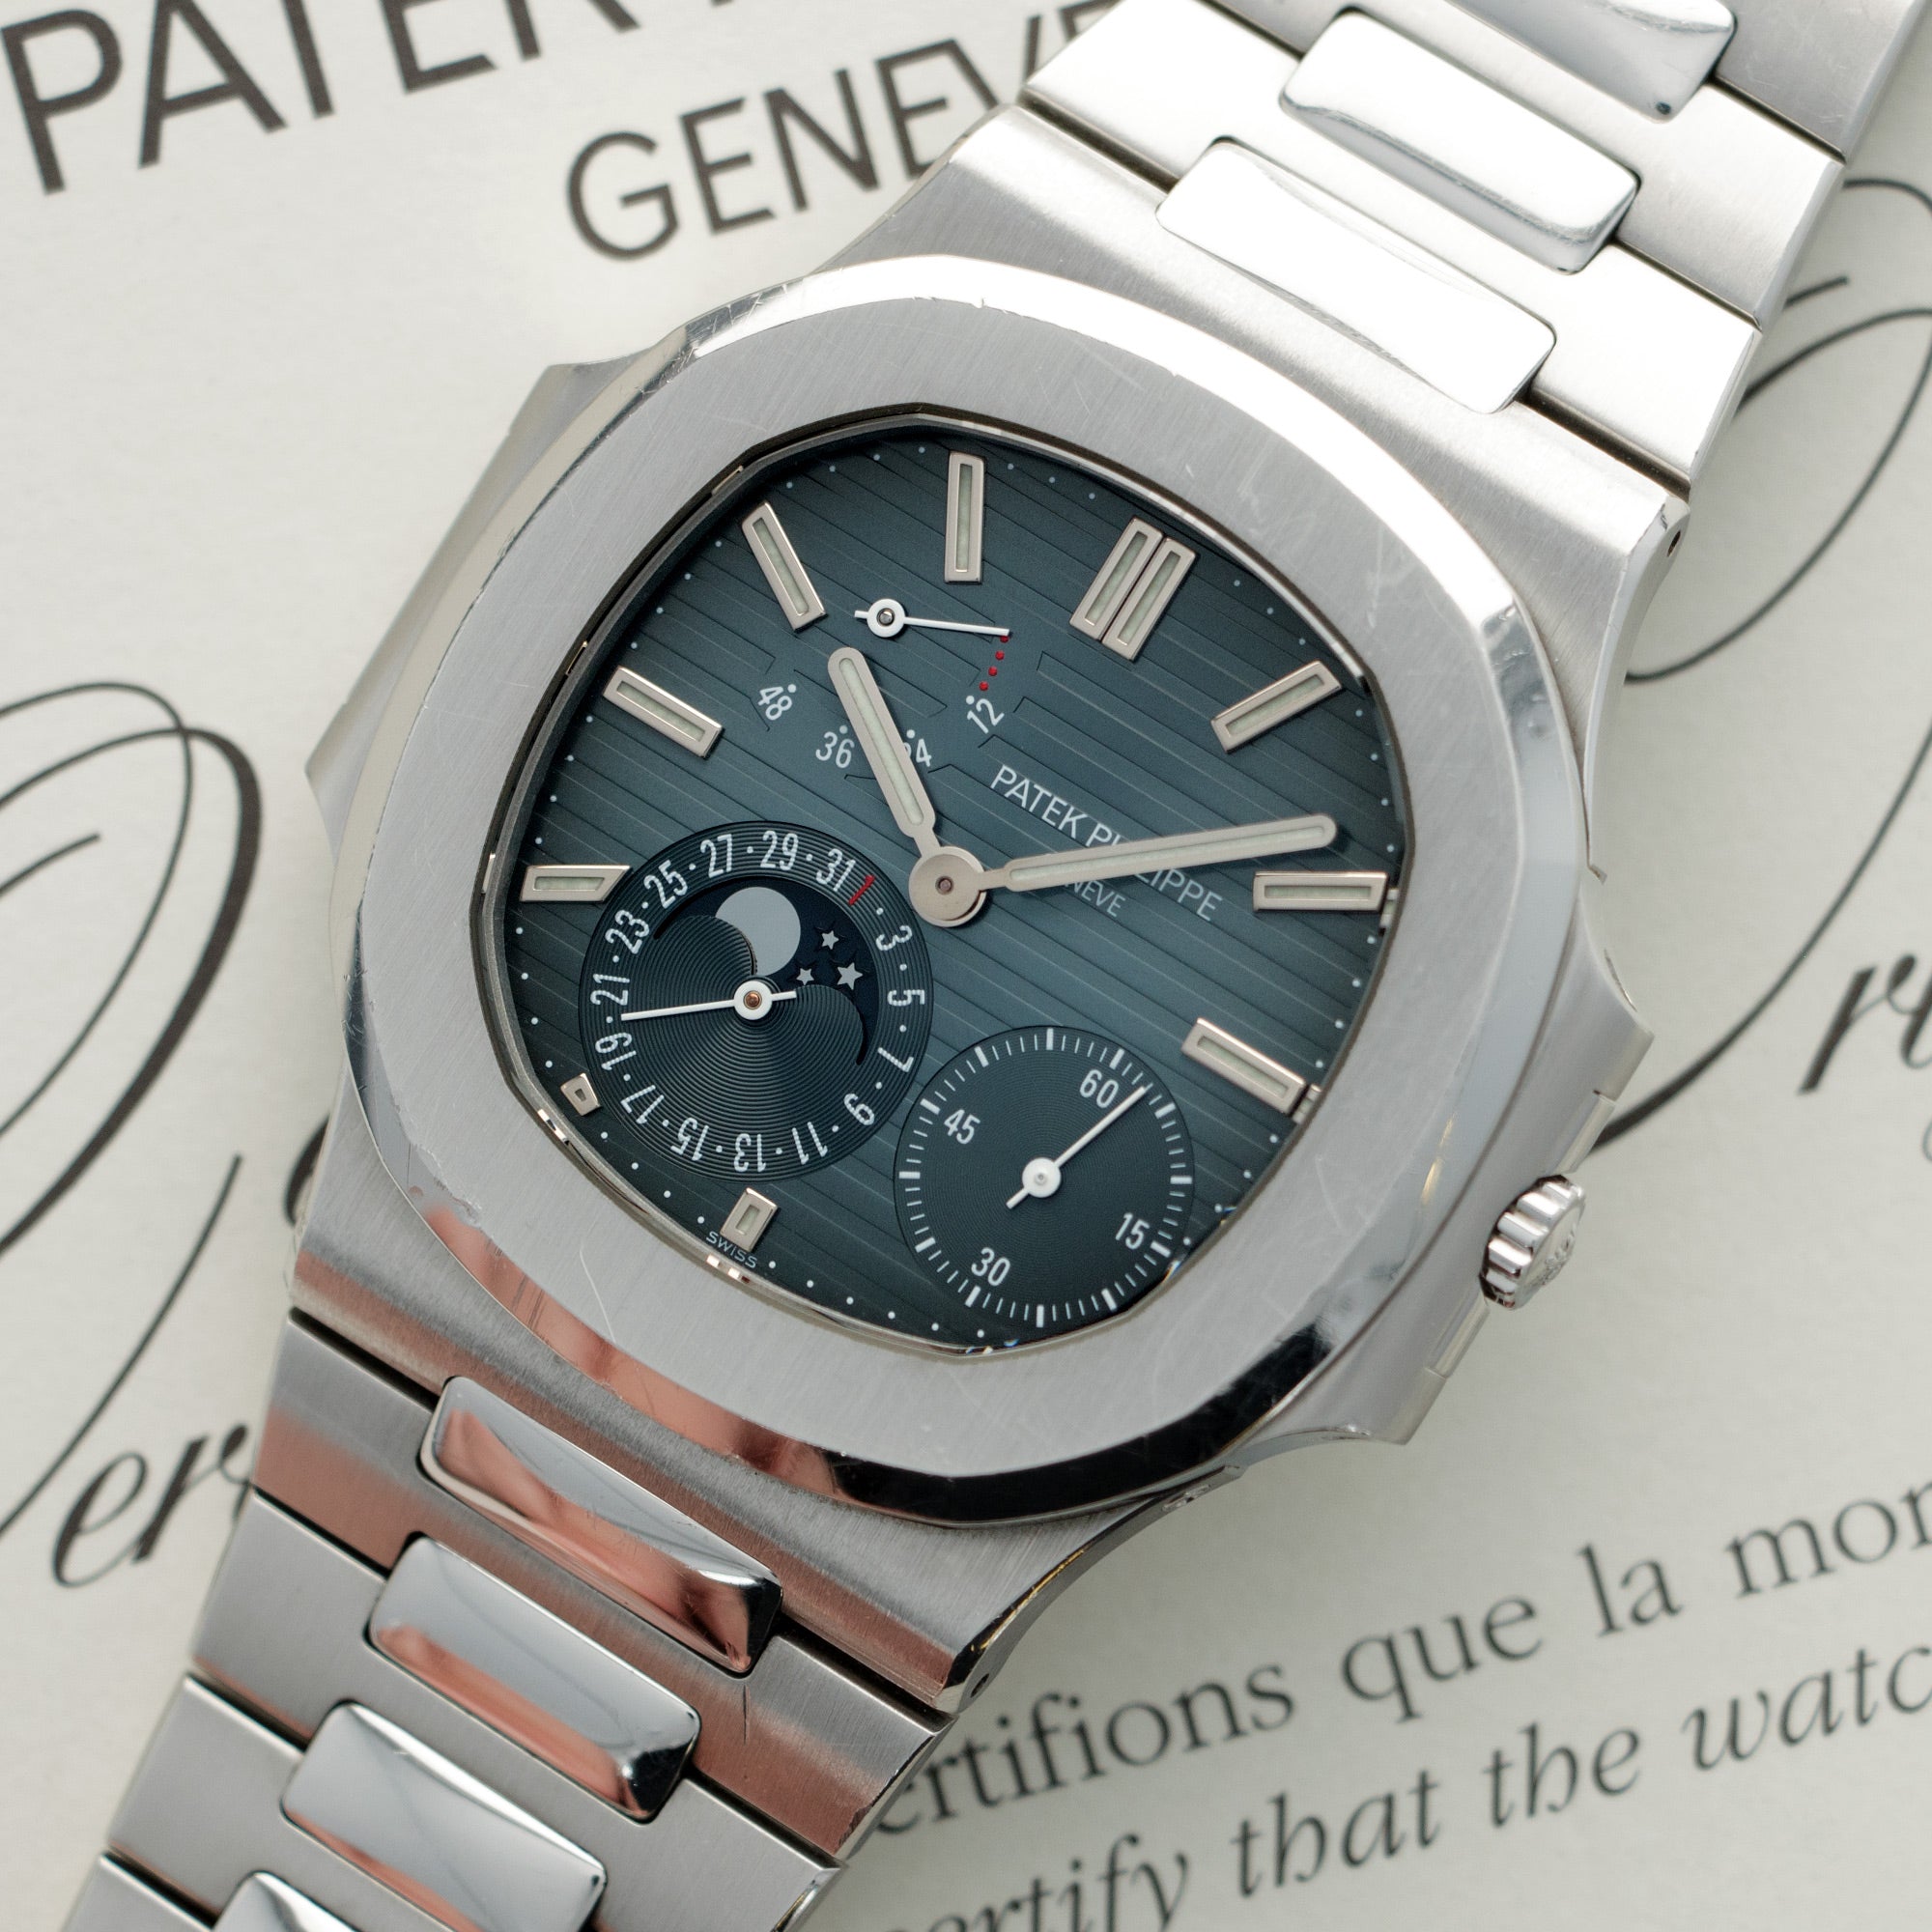 Patek Philippe - Patek Philippe Nautilus Moonphase Watch Ref. 3712 with Original Box and Papers - The Keystone Watches